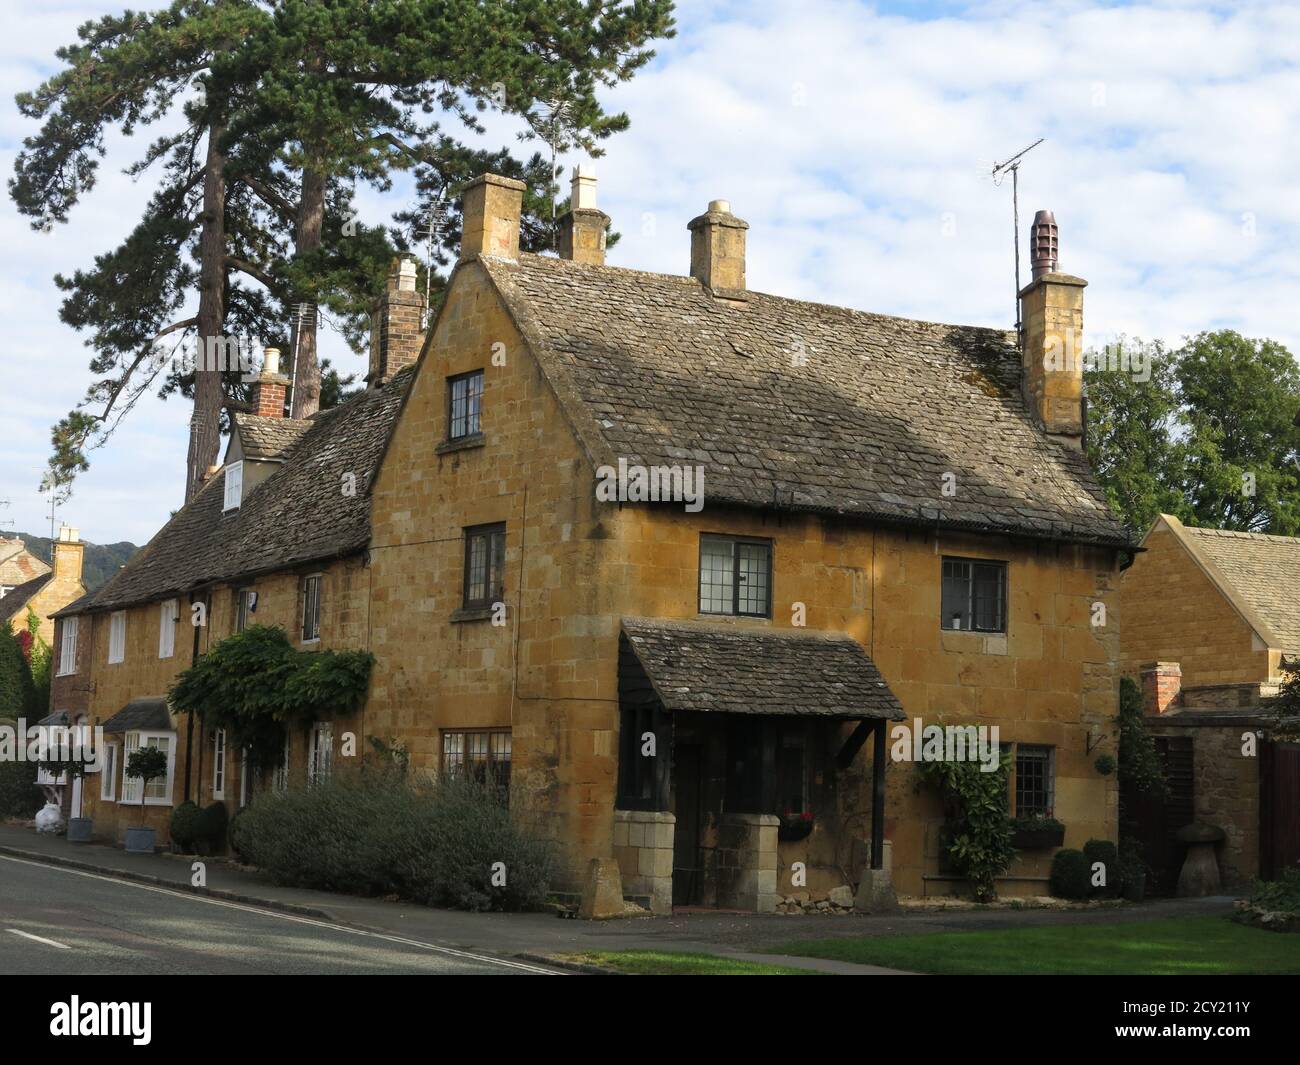 The High Street in the Cotswold village of Broadway is lined with traditional houses and cottages, built from the local honey-coloured stone. Stock Photo